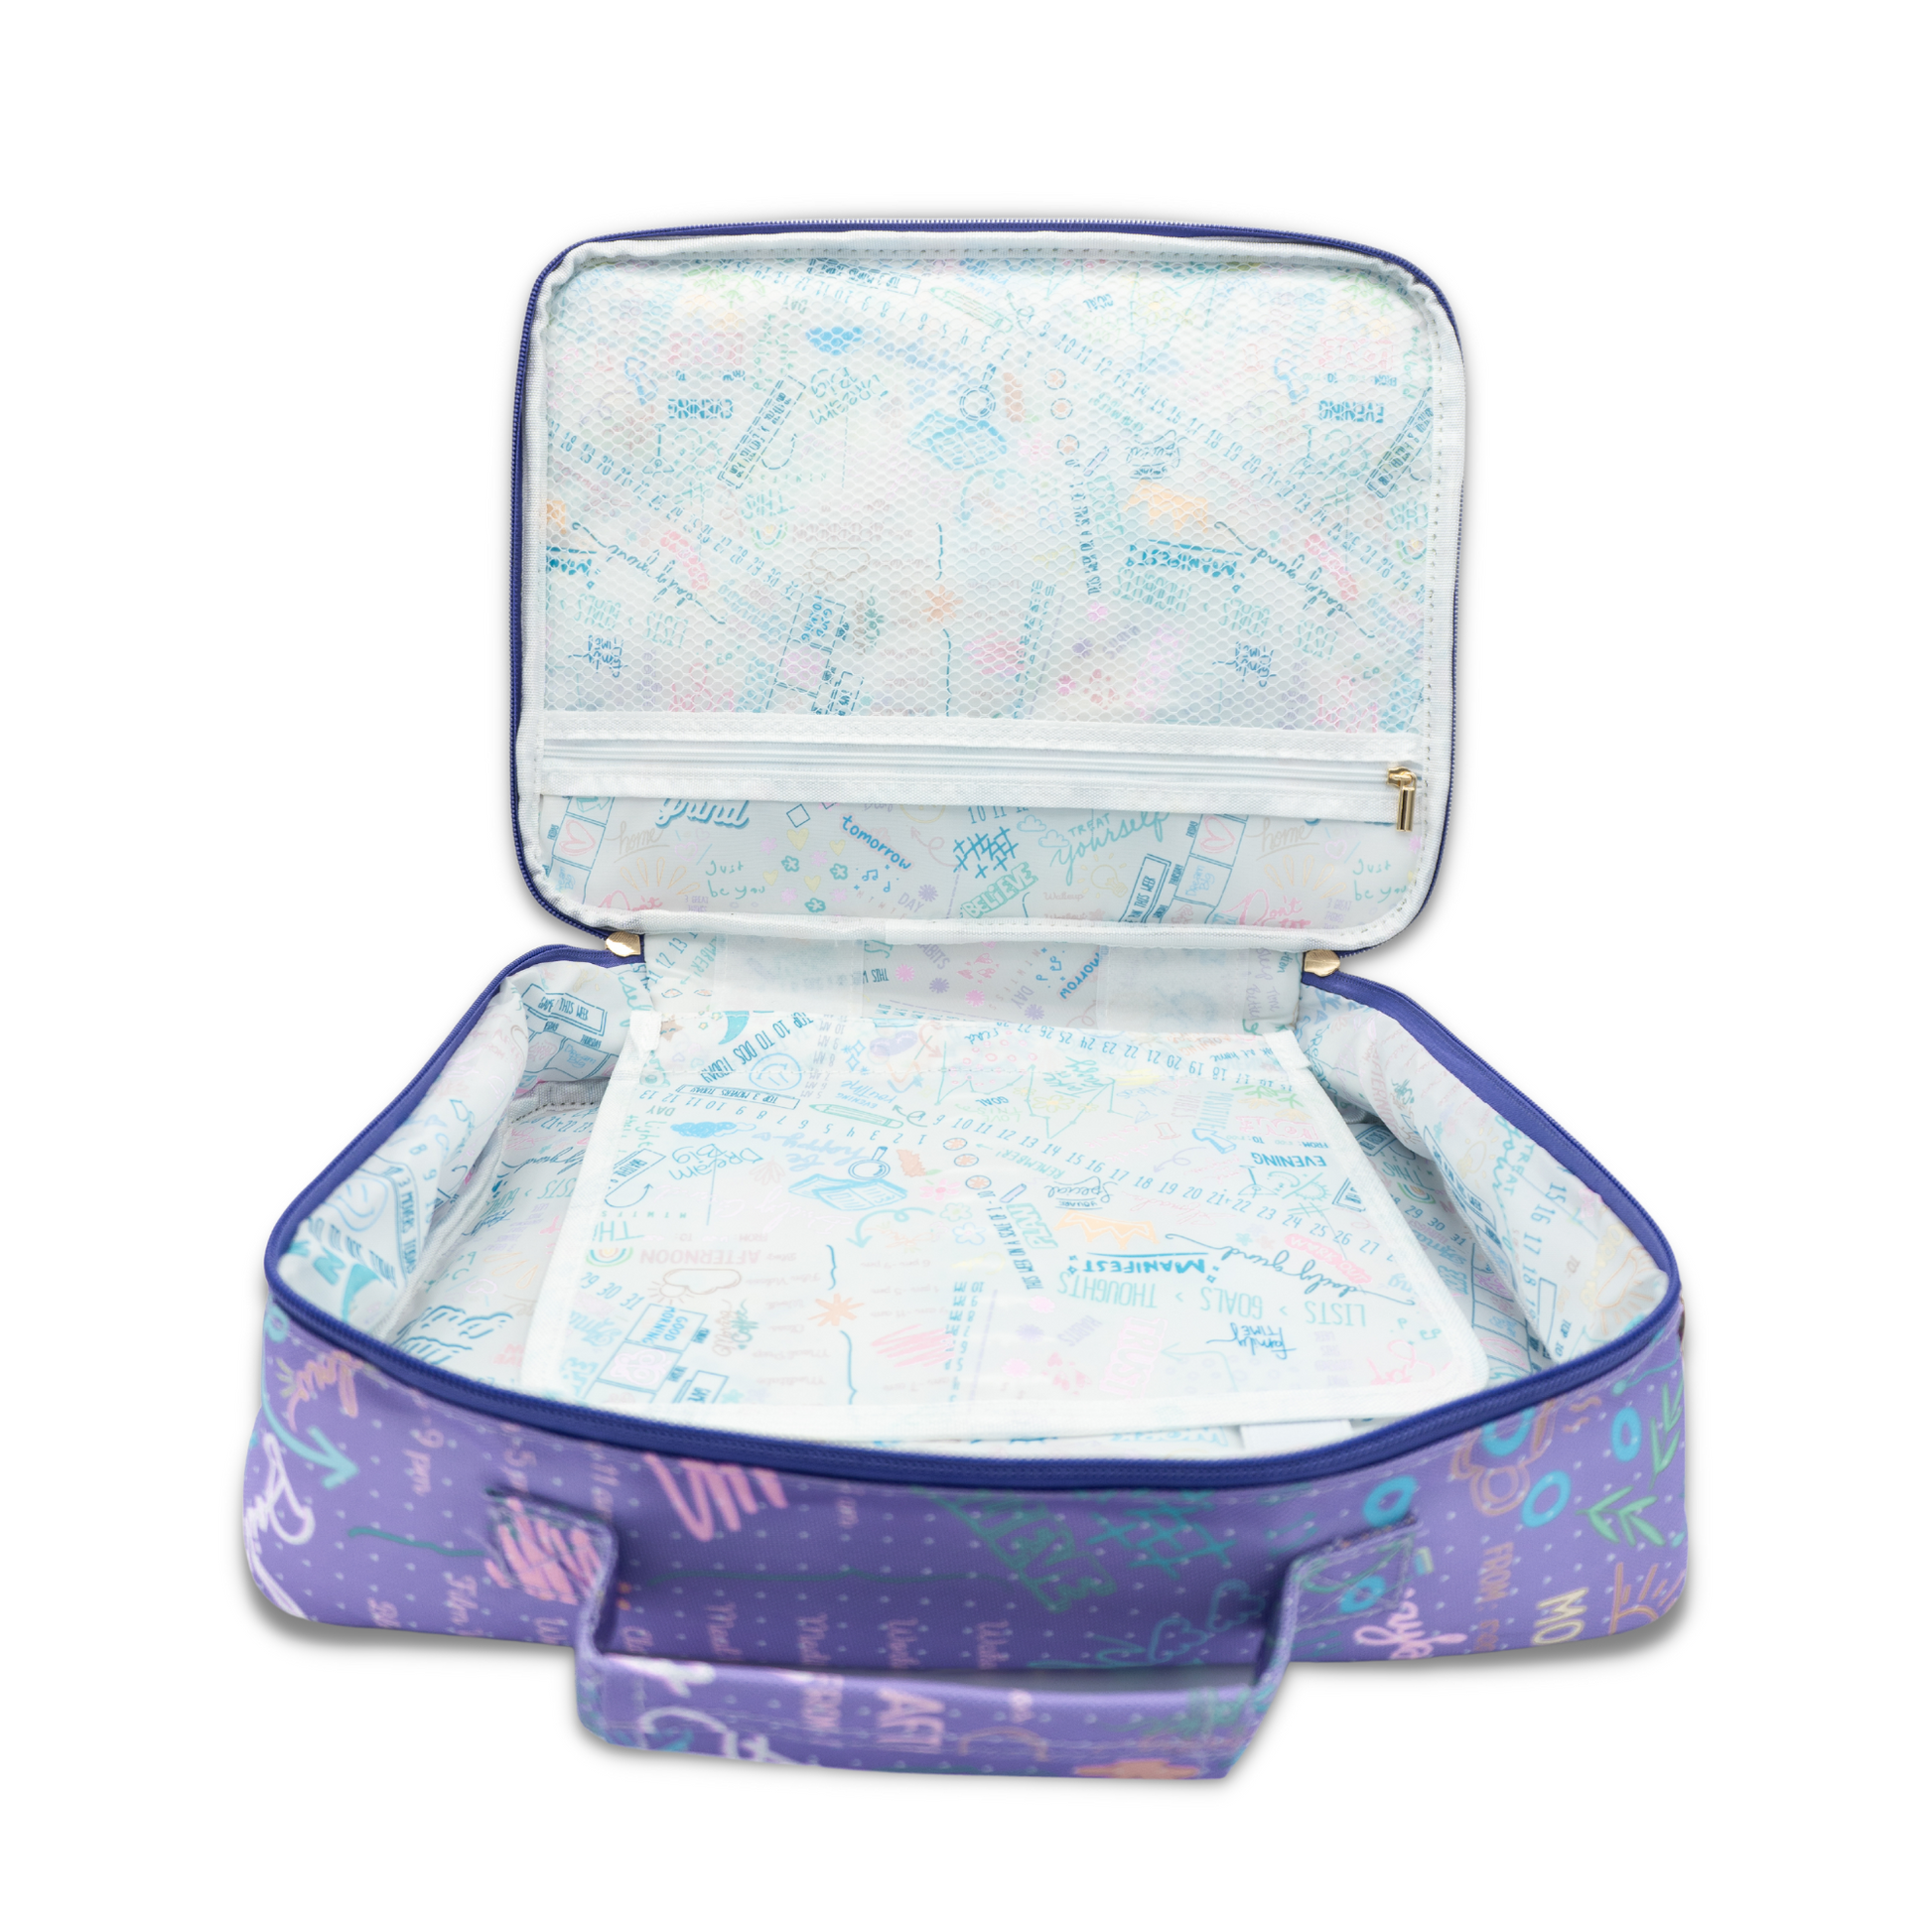 Inside view of purple travel planner case